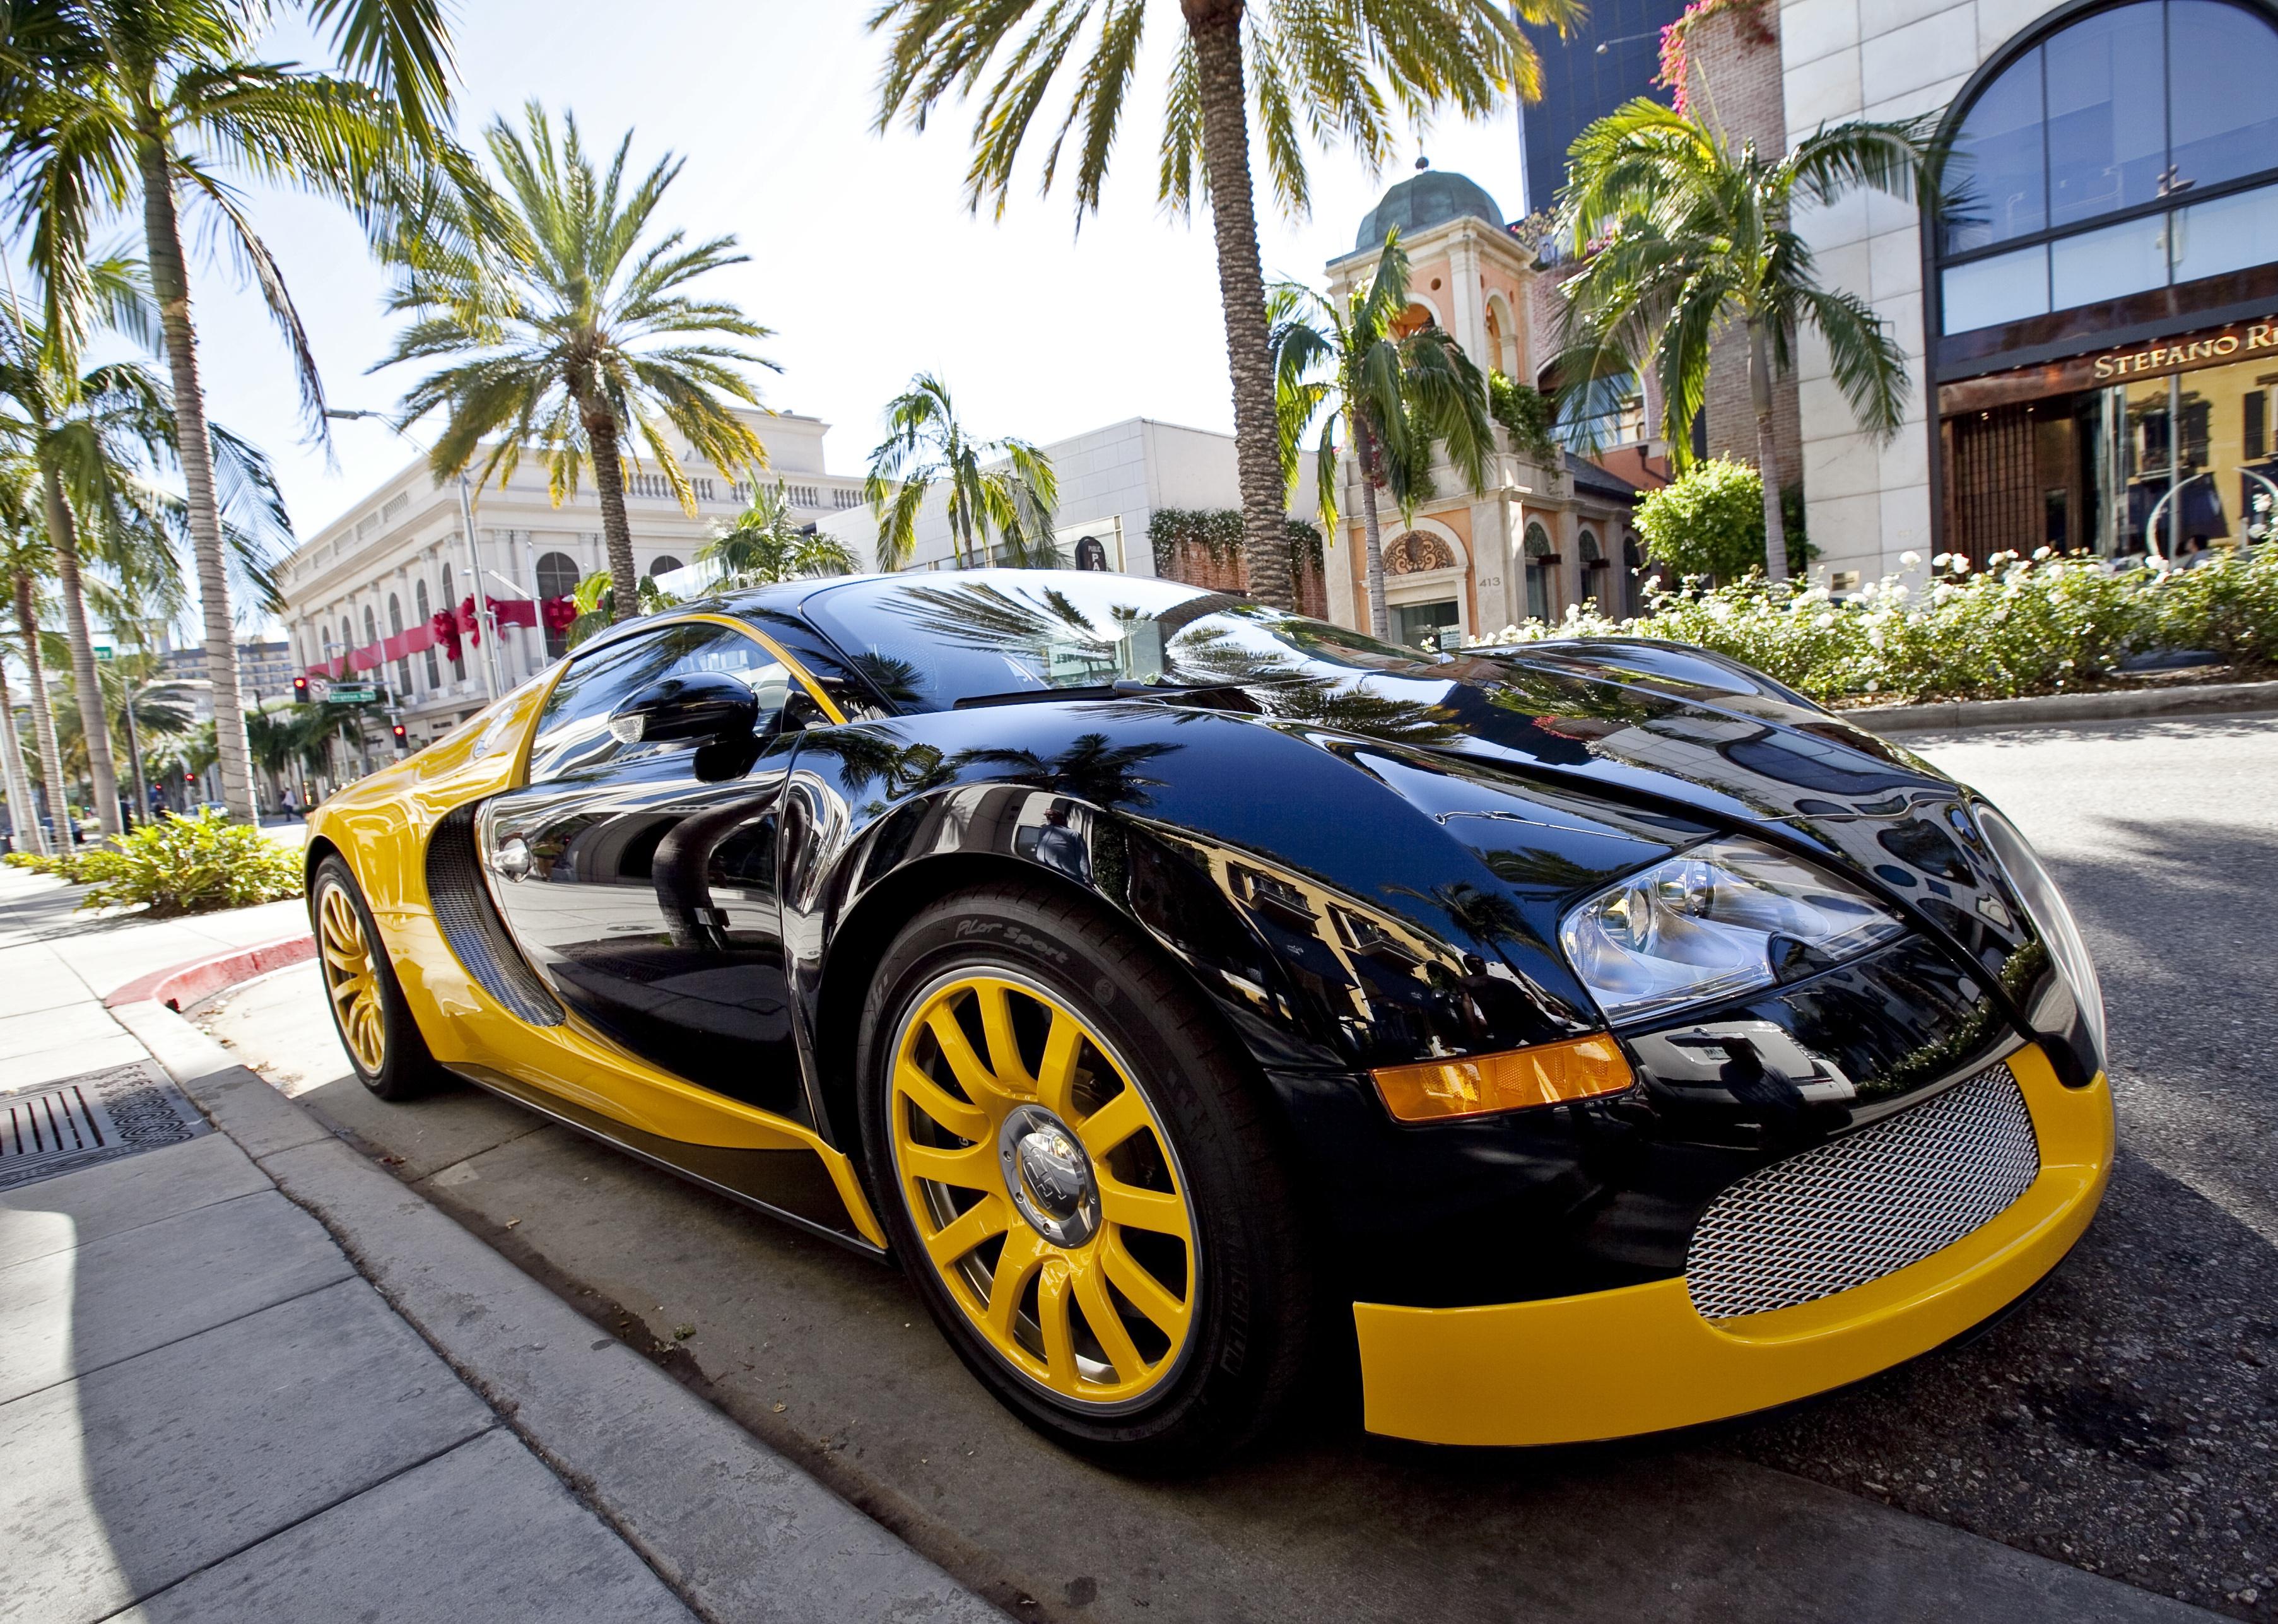 A million dollar Bugatti Veyron owned by fashion designer Bijan parked in front of his Rodeo Drive store.